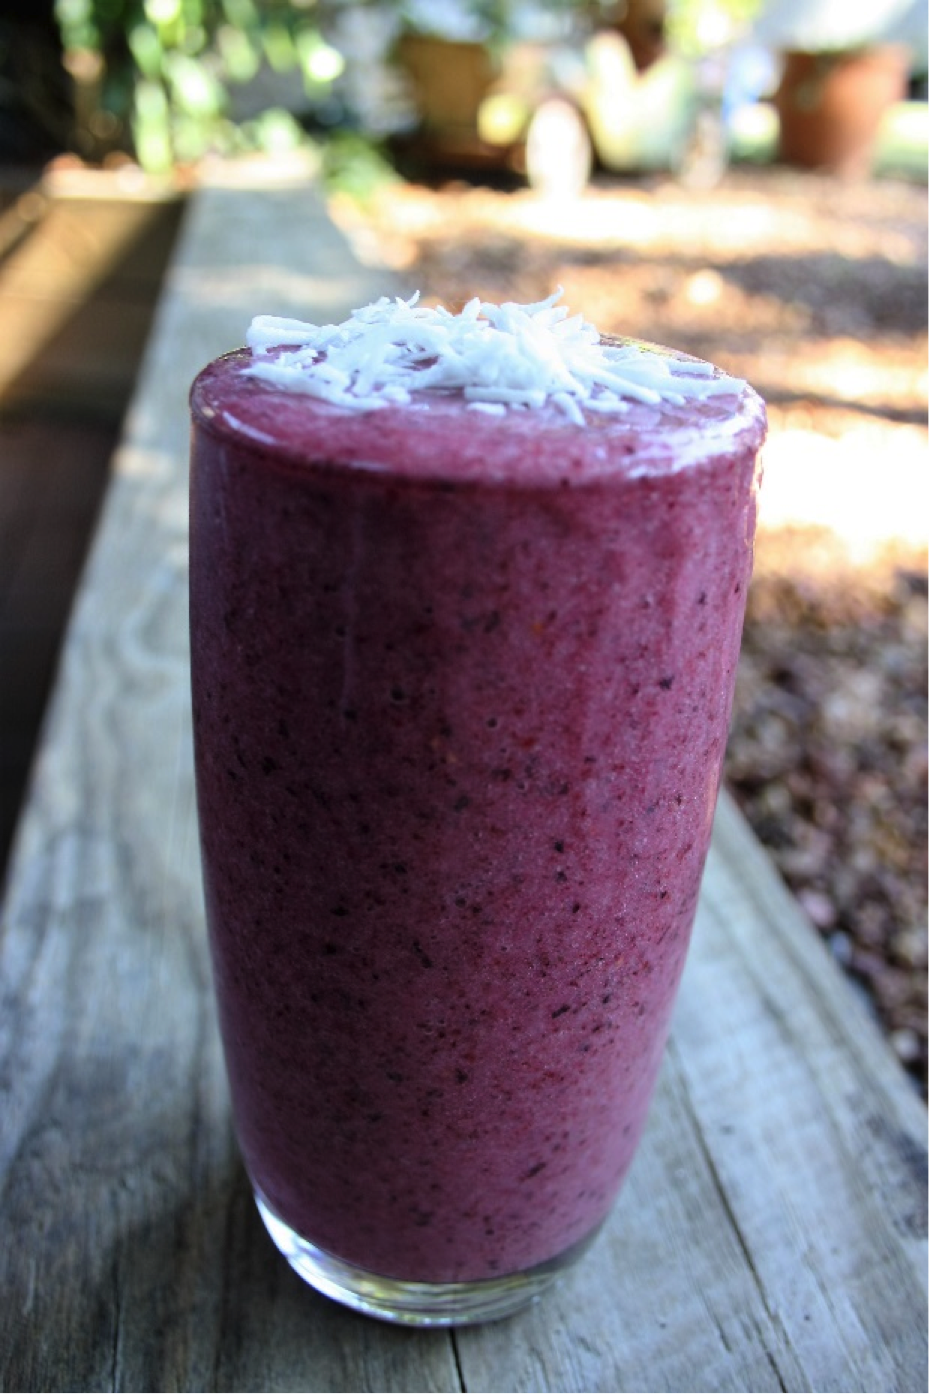 Recipe of the Week: Em's Fruity Smoothie